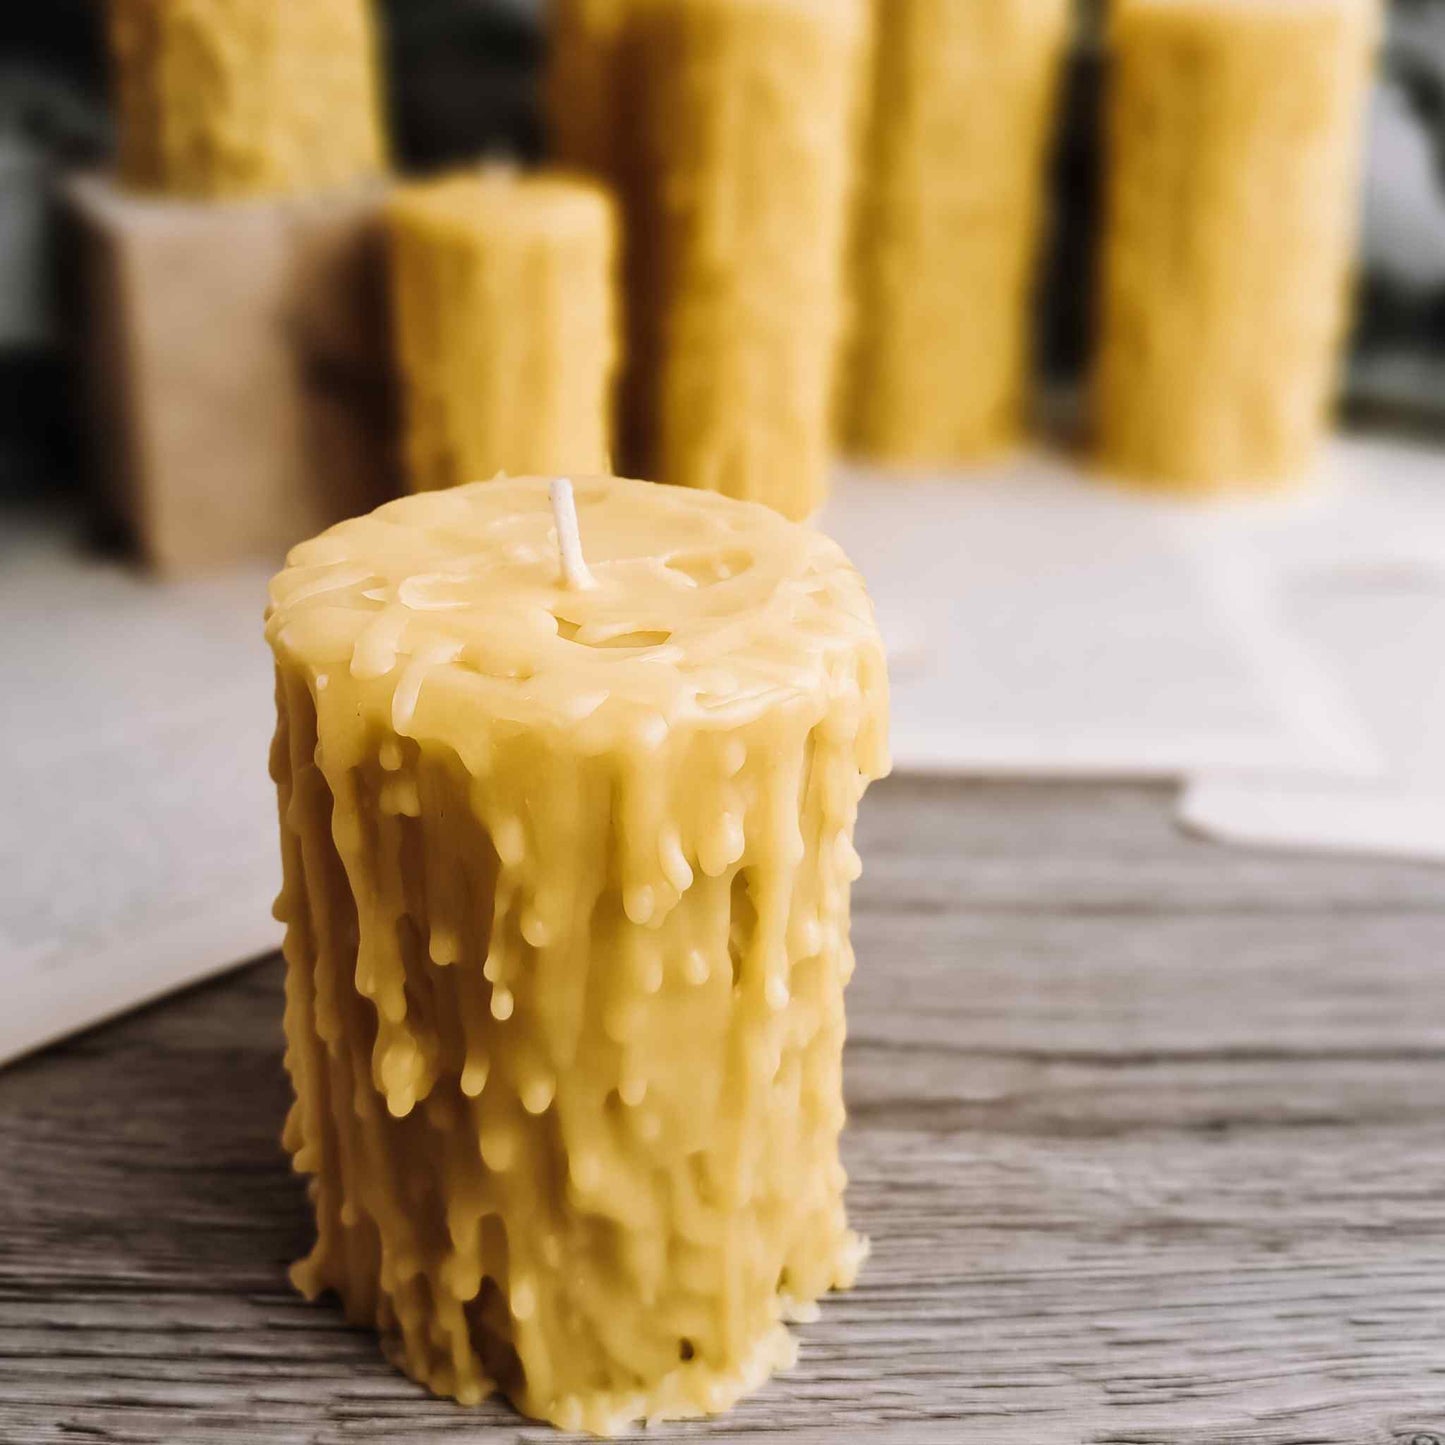 Artisan-crafted beeswax candles with a bespoke drip effect, displayed against a dark background, highlighting their unique shapes and sizes